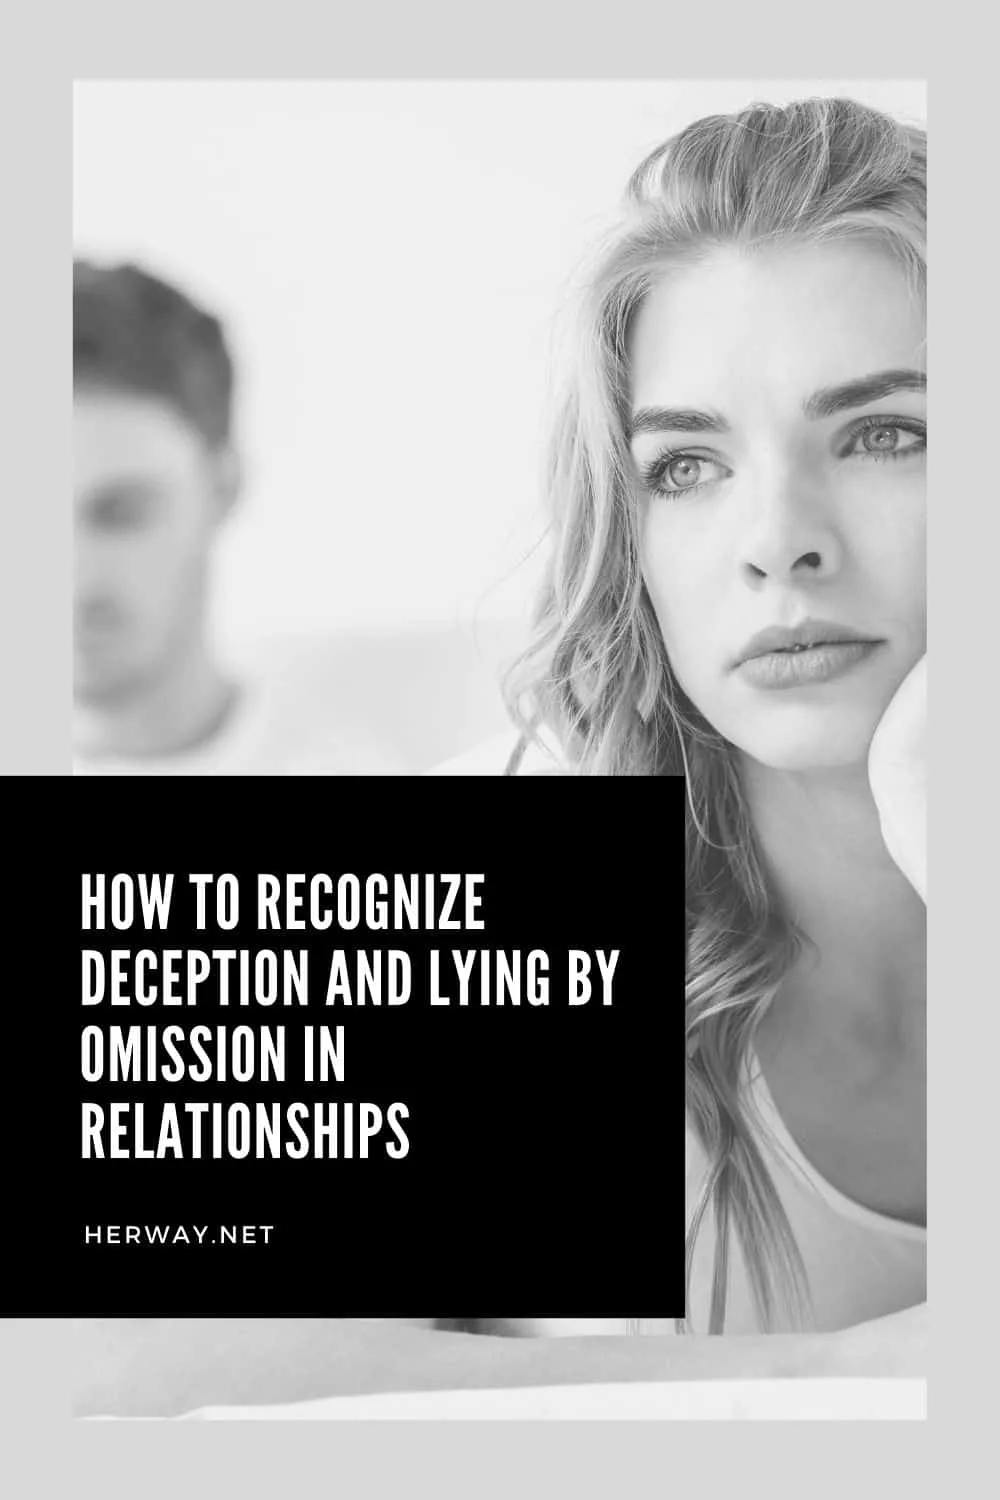 How To Recognize Deception And Lying By Omission In Relationships